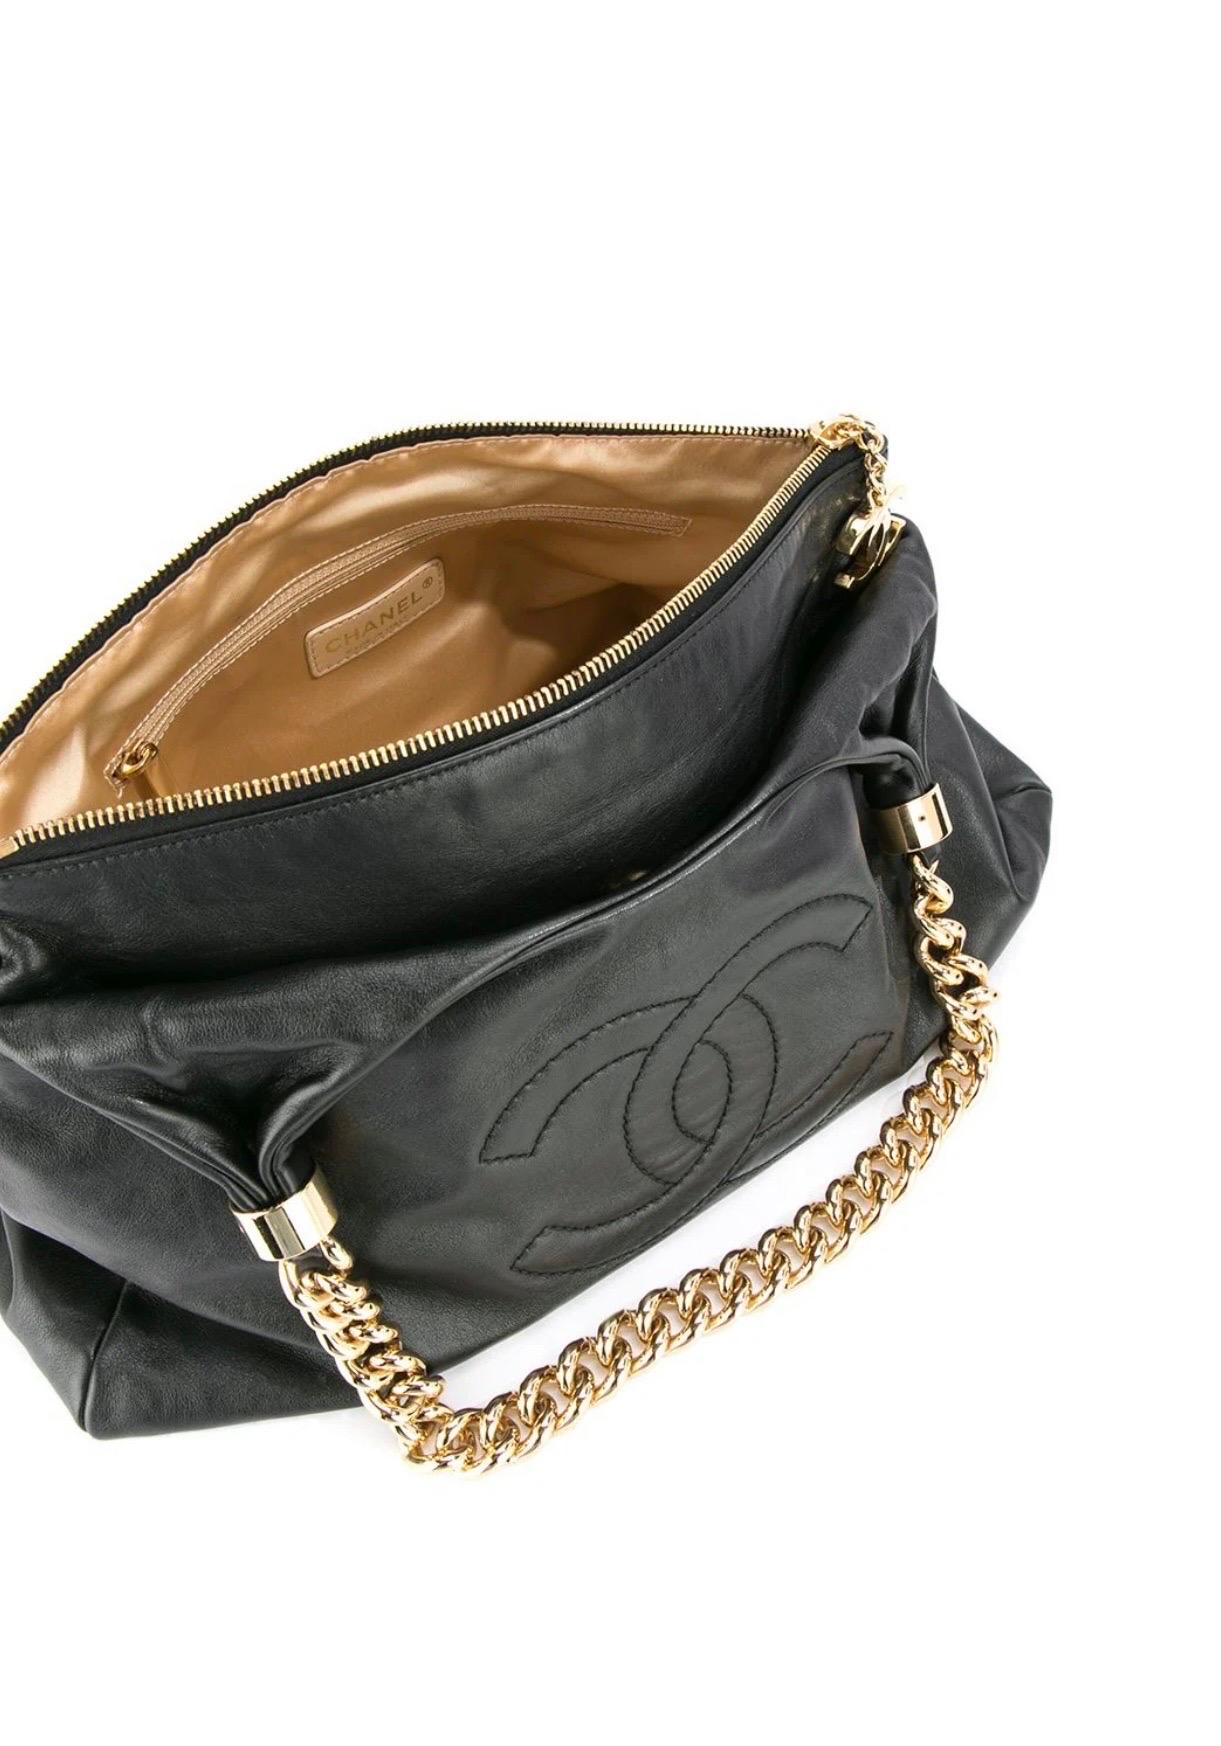 Chanel 2009 CC Logo Thick Chain Black Calfskin Hobo Shoulder Tote  For Sale 3